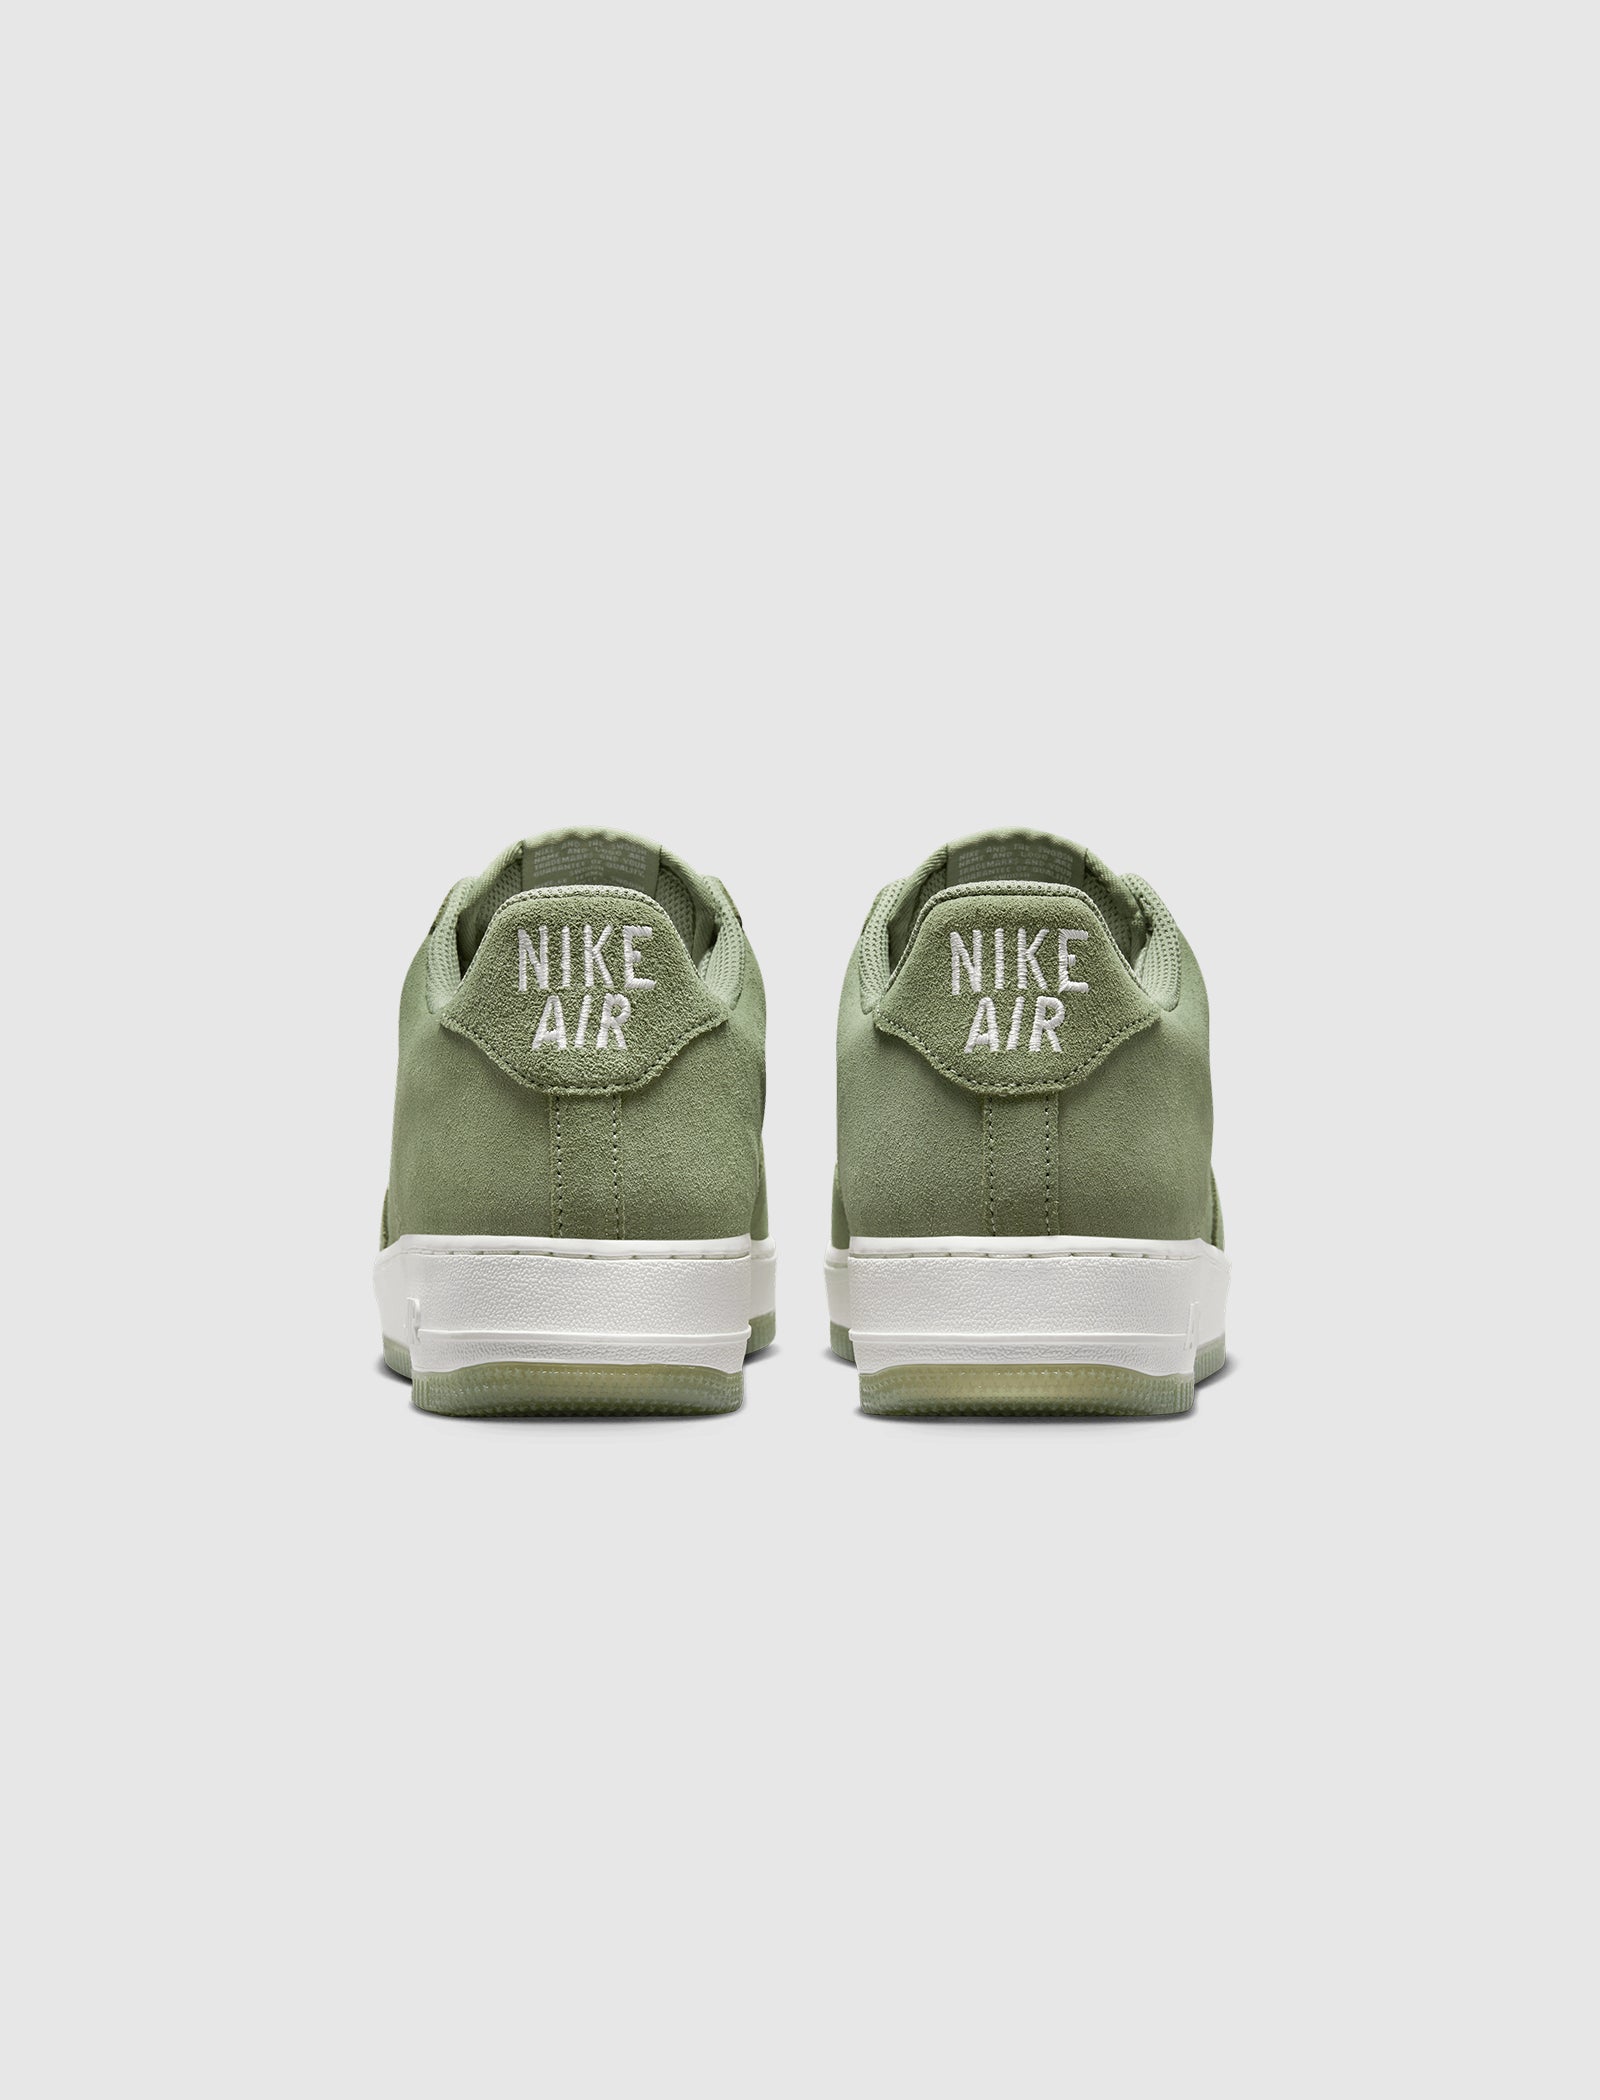 Nike Air Force 1 High 'Oil Green' | Men's Size 9.5